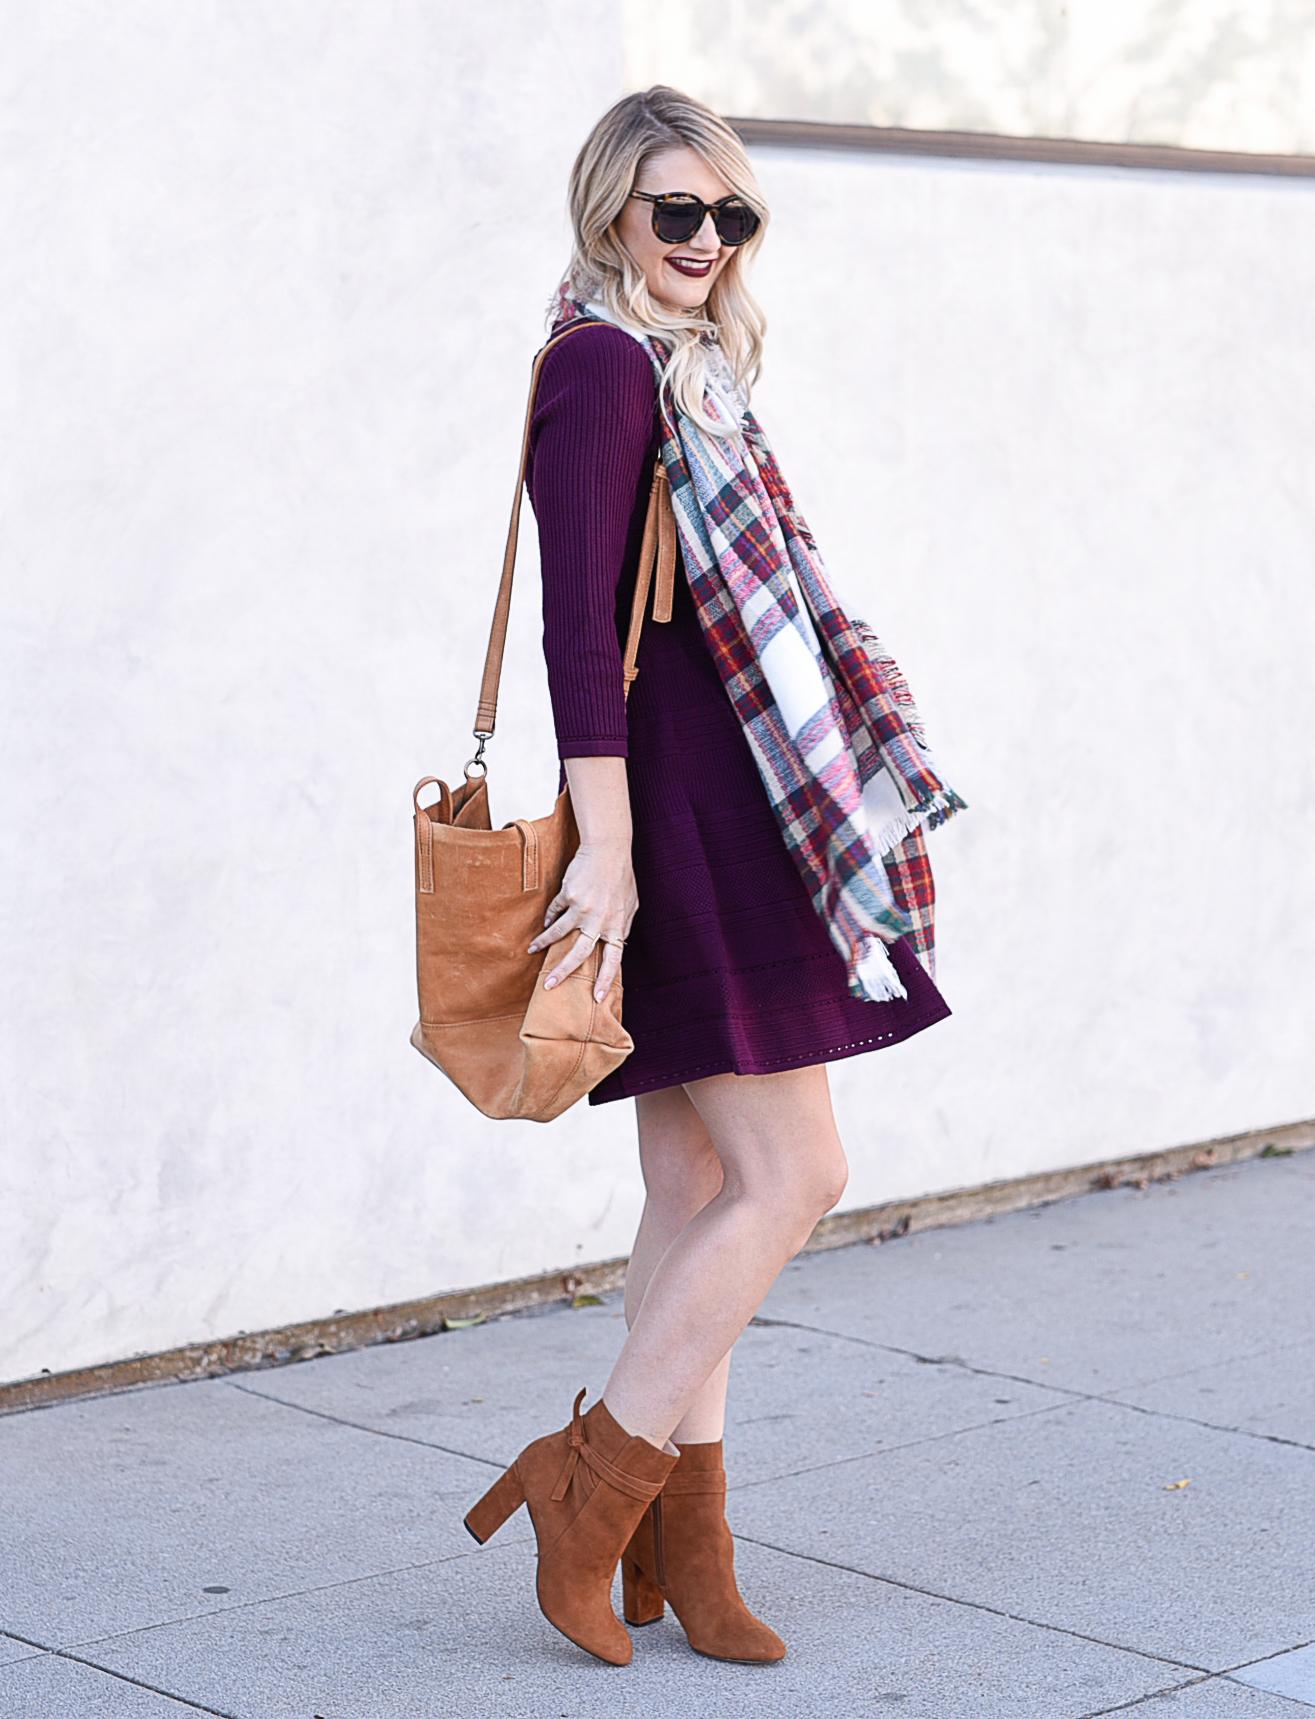 Jenna Colgrove wearing an Eliza J sweater dress in burgundy and a cognac tote bag. 